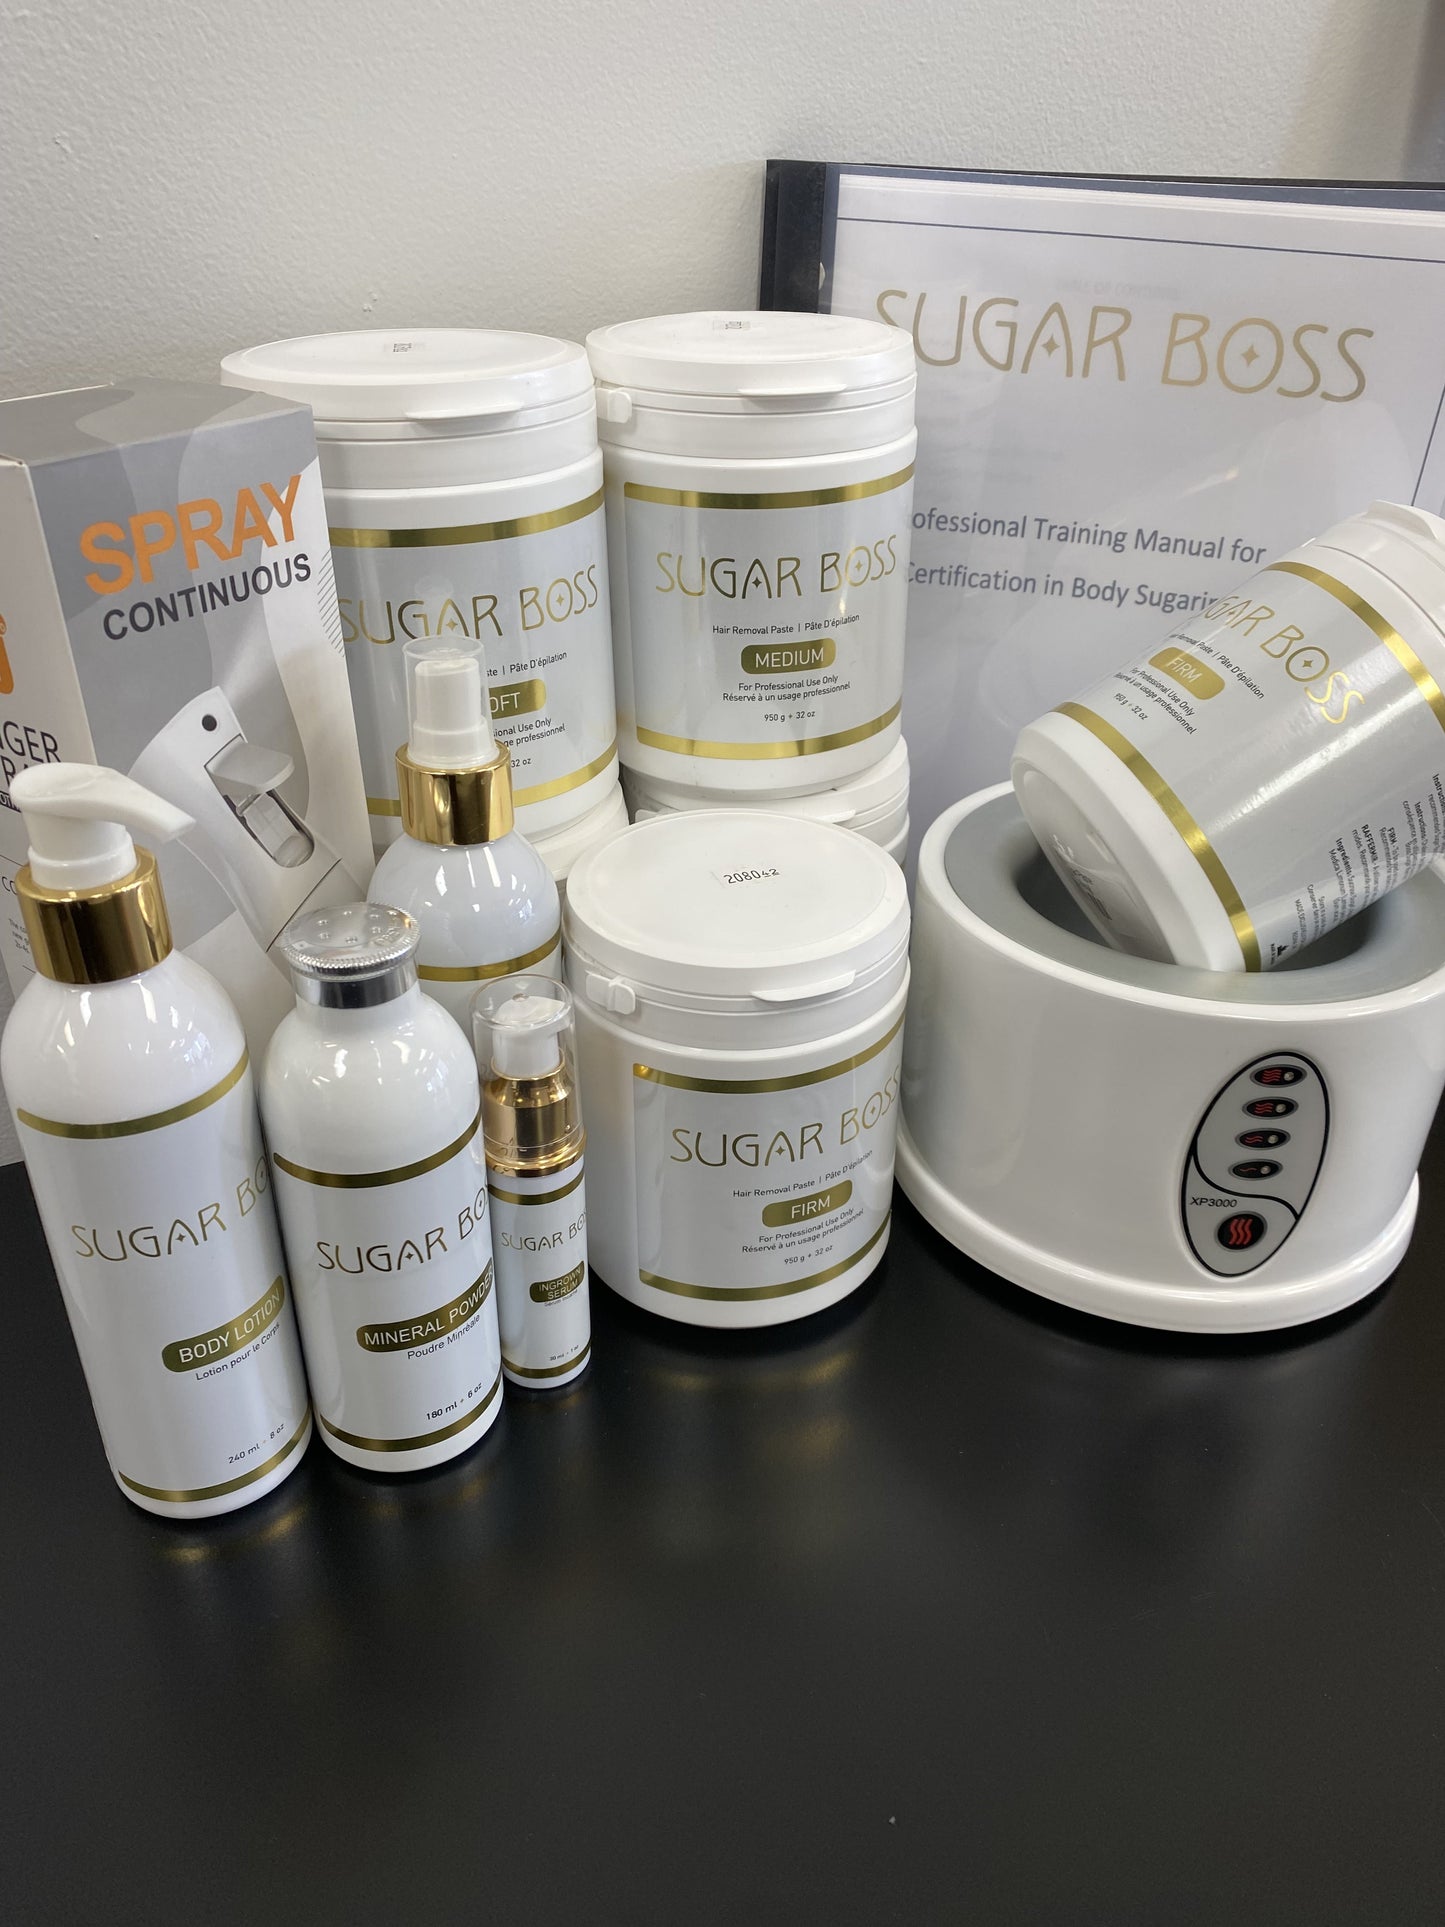 Sugar Boss Sugaring Course - Kit with Warmer